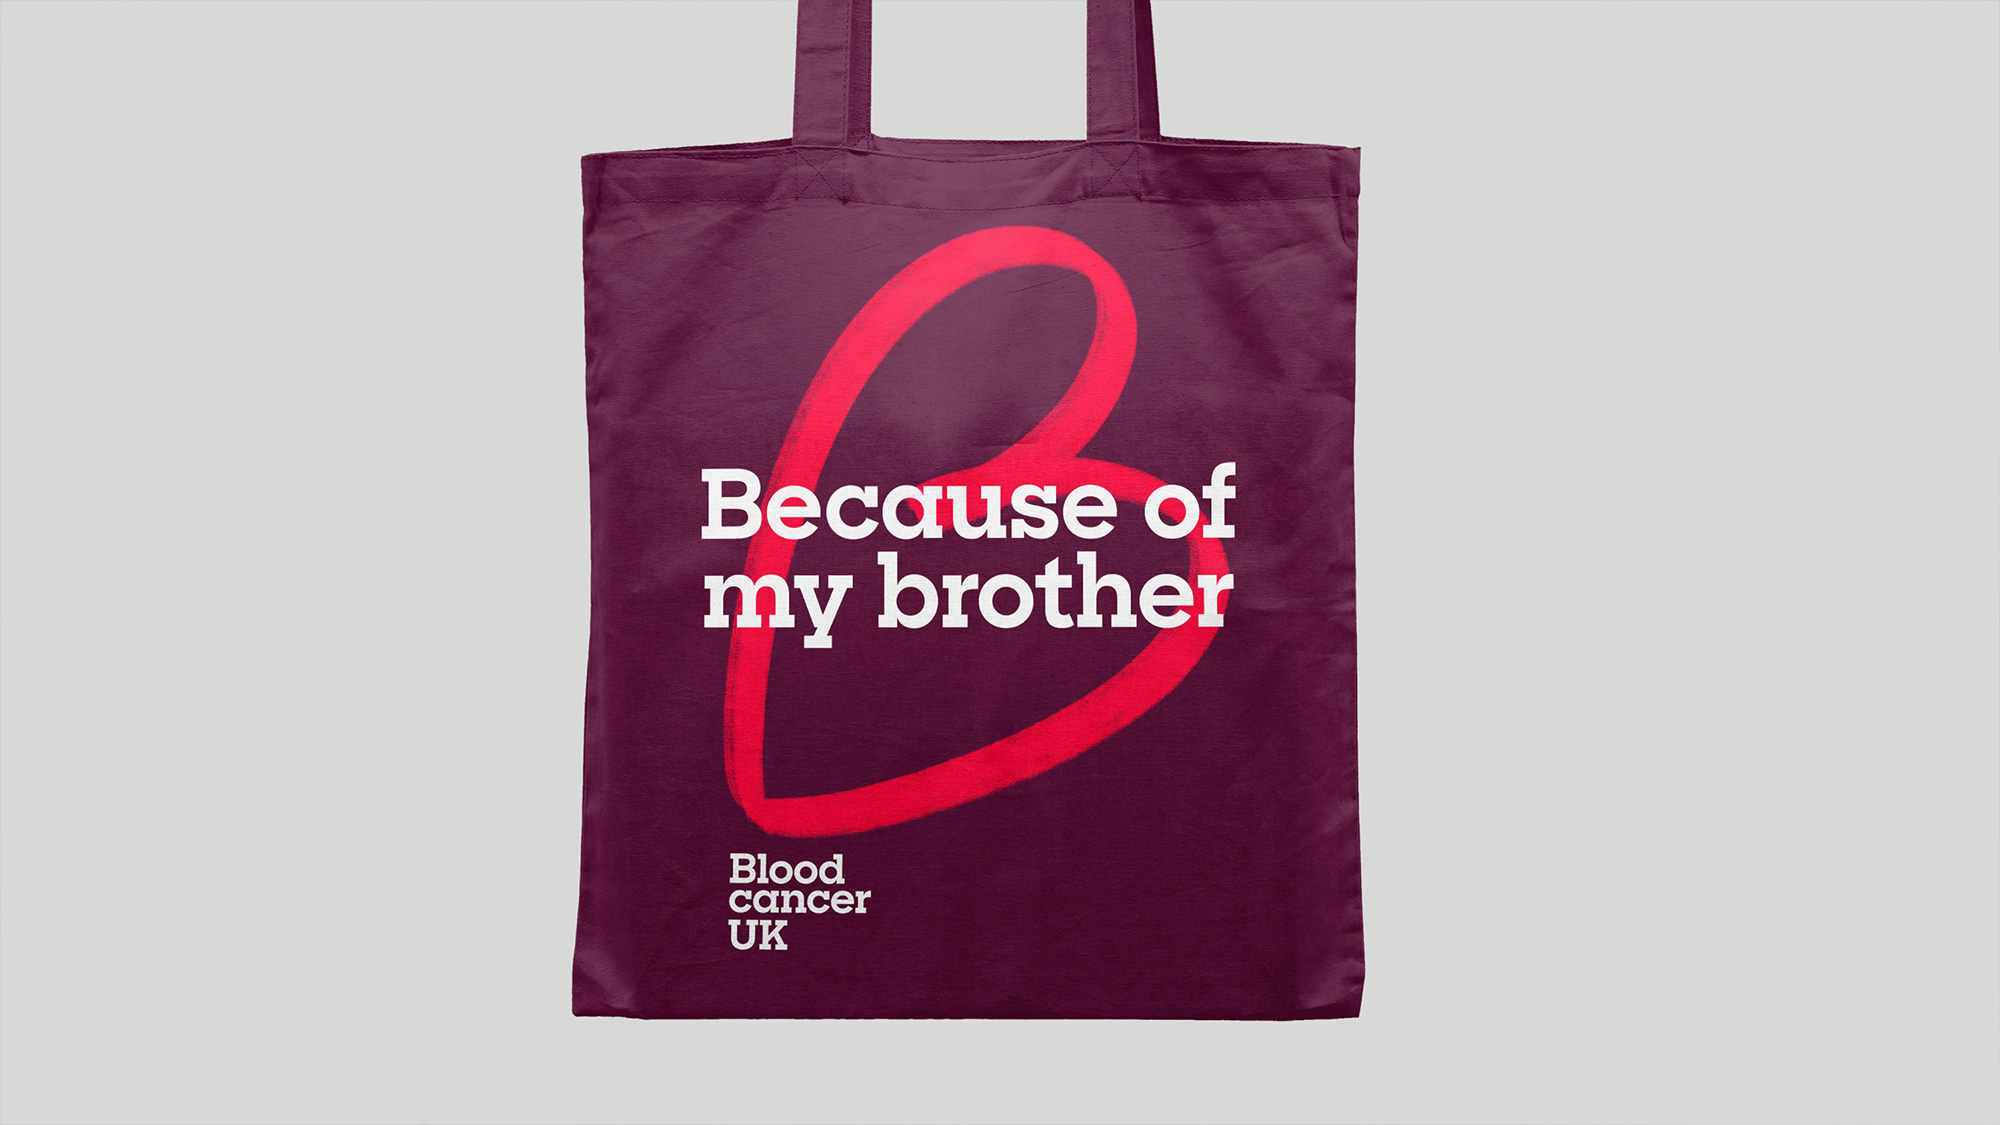 New Logo and Identity for Blood Cancer UK by Pentagram